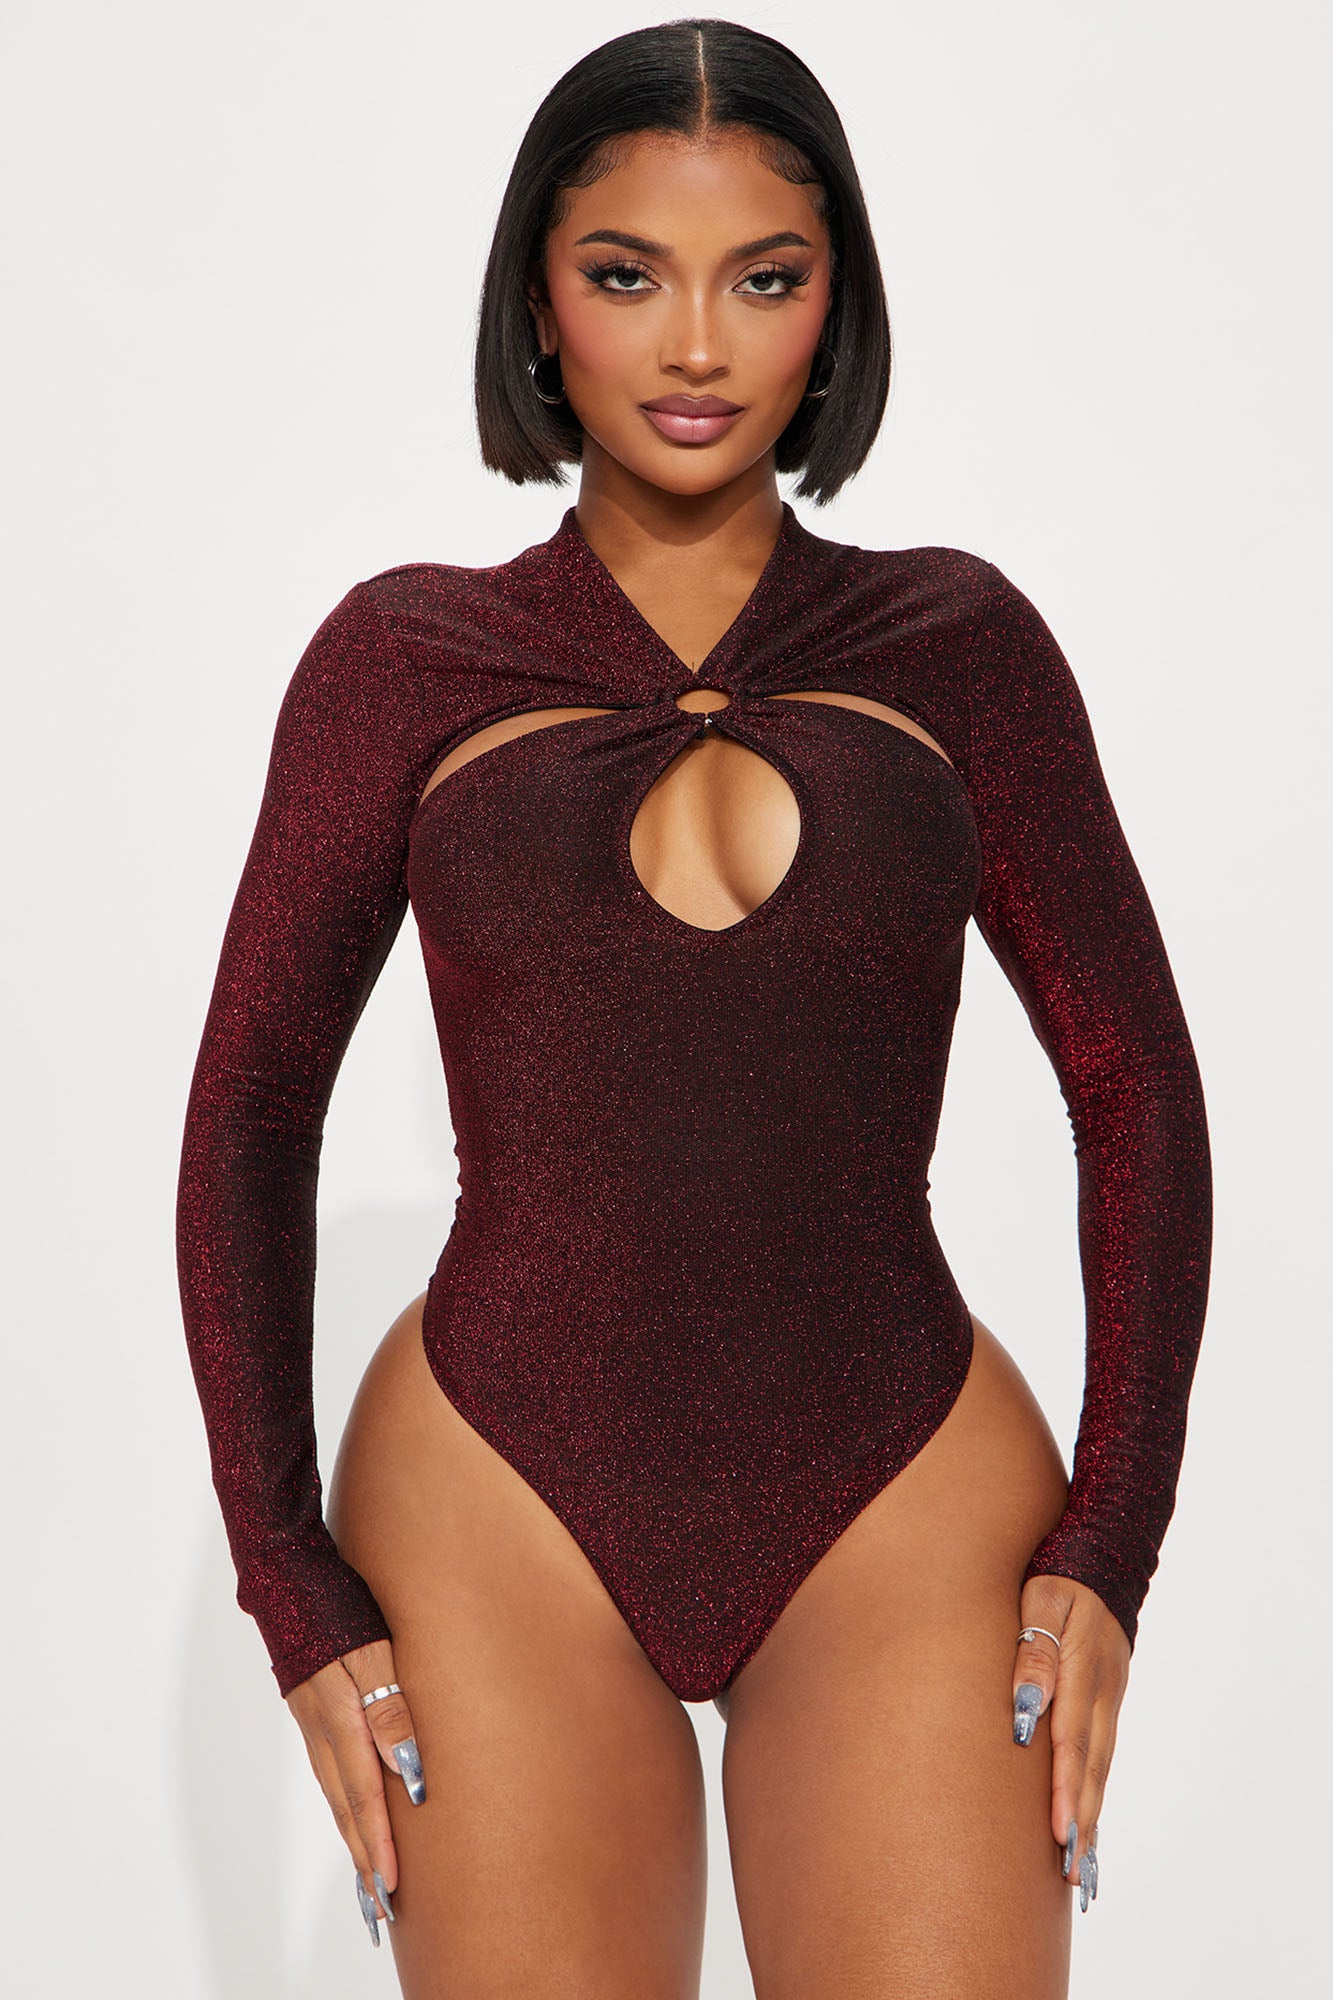 Fantavitelli Is Bringing a Forgotten Italian Subculture to Life, One Knit  Bodysuit at a Time